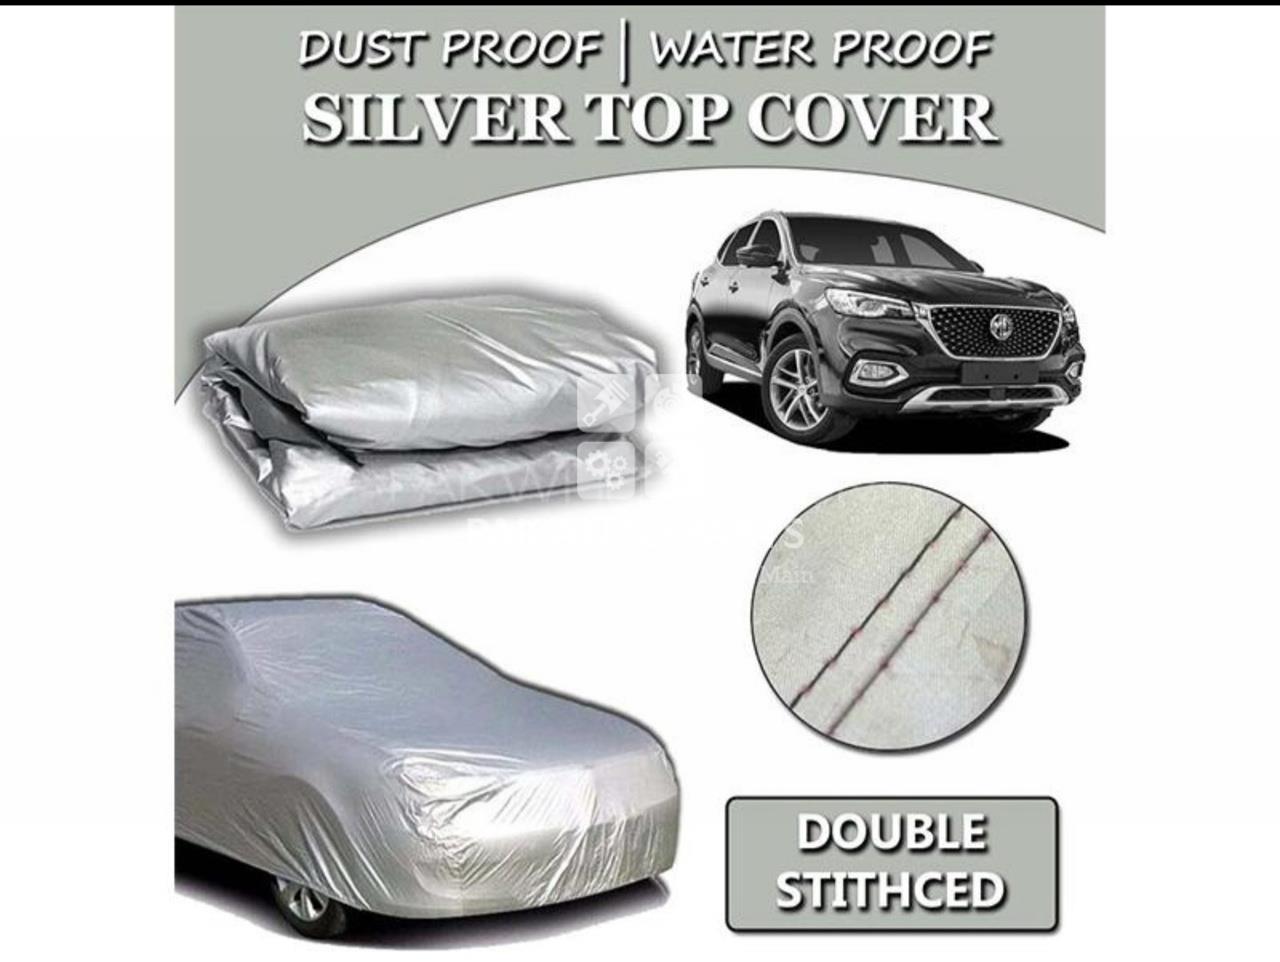 Picture of MG-ZS Parachute | Silver Coated | Body Cover | Water, Dust & Heat Proof 100% | Double Stitched